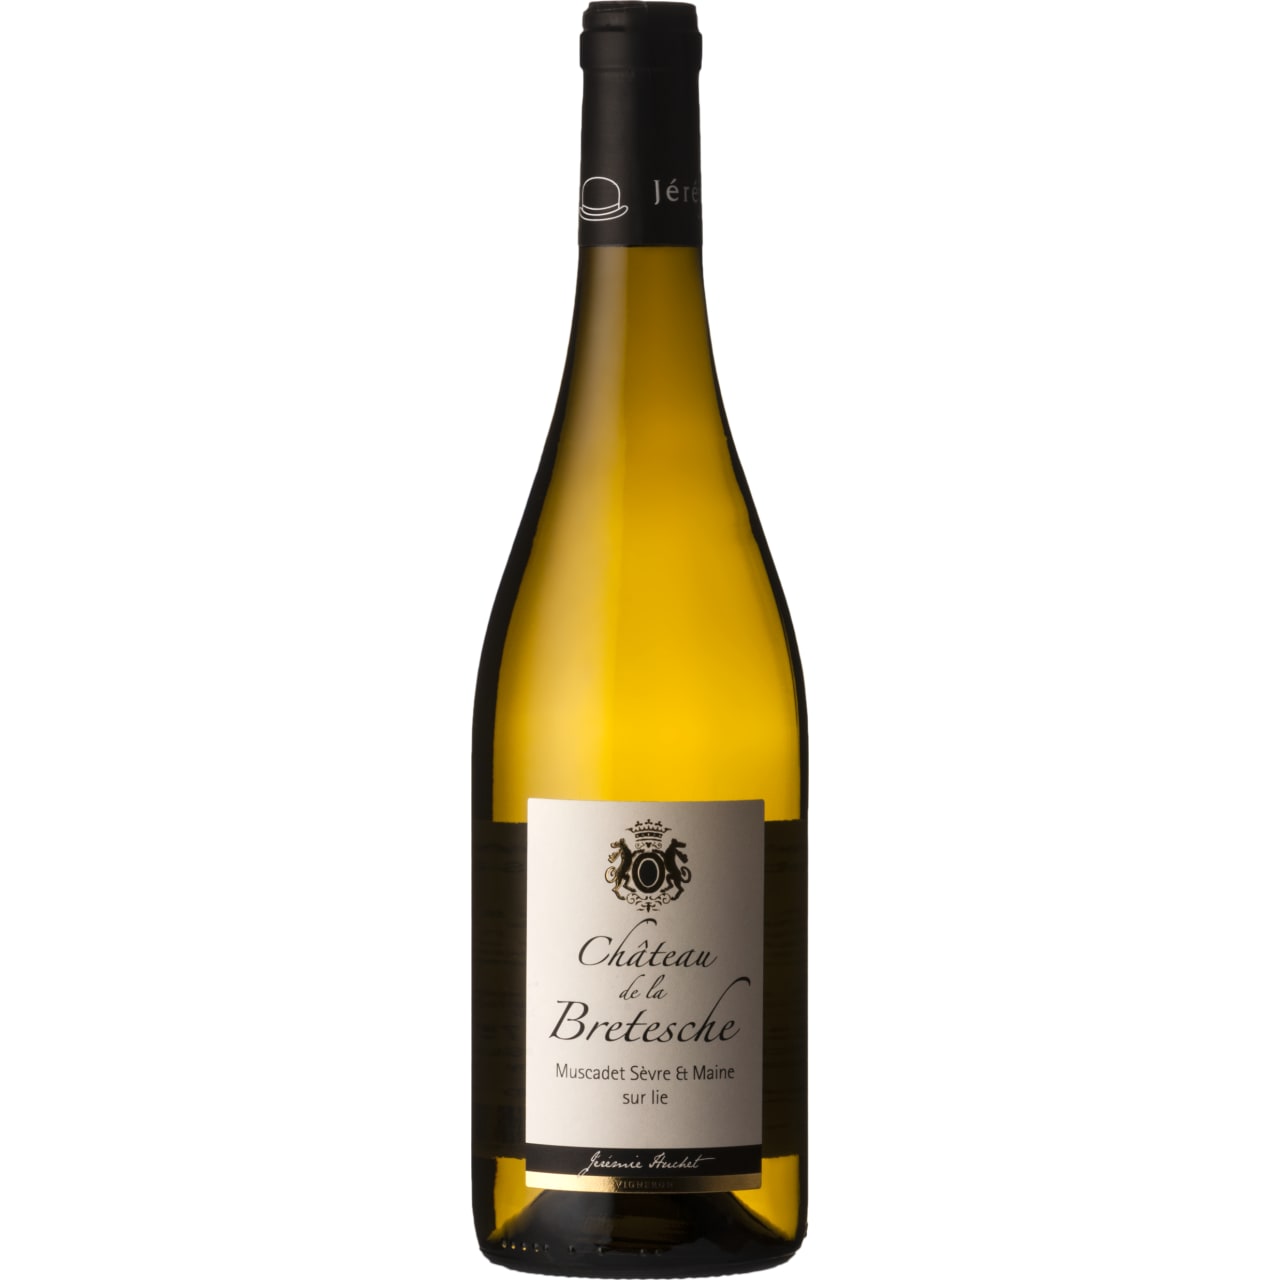 A true terroir Muscadet - with elegance, complexity, mellowness and a touch of the mineral touch.